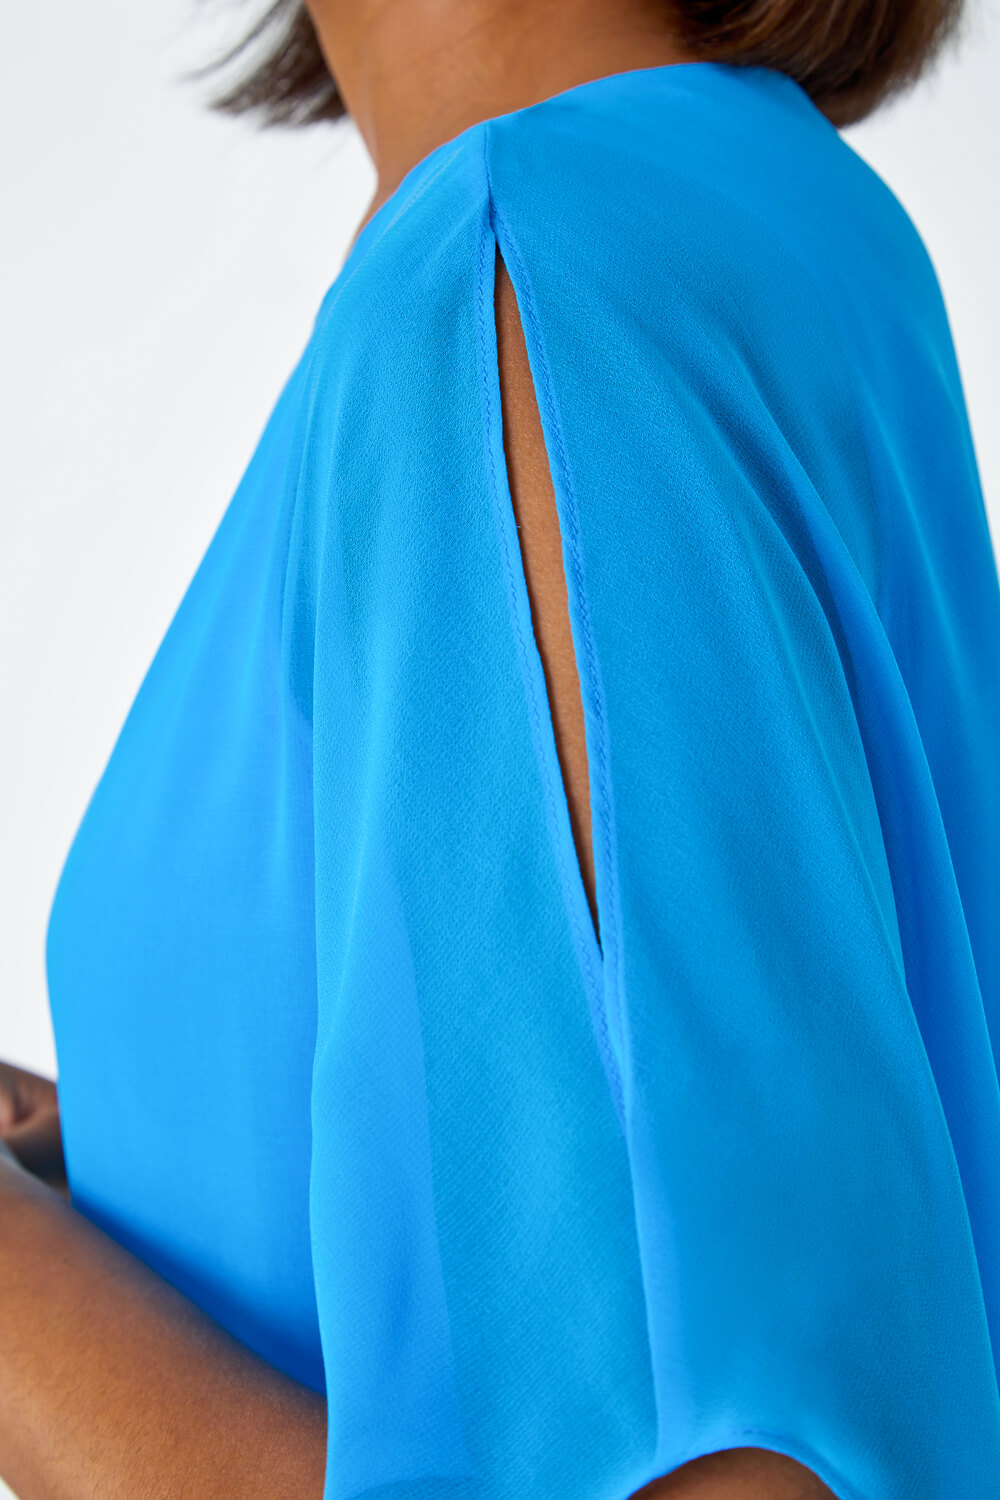 Turquoise Asymmetric Cold Shoulder Stretch Top, Image 5 of 5